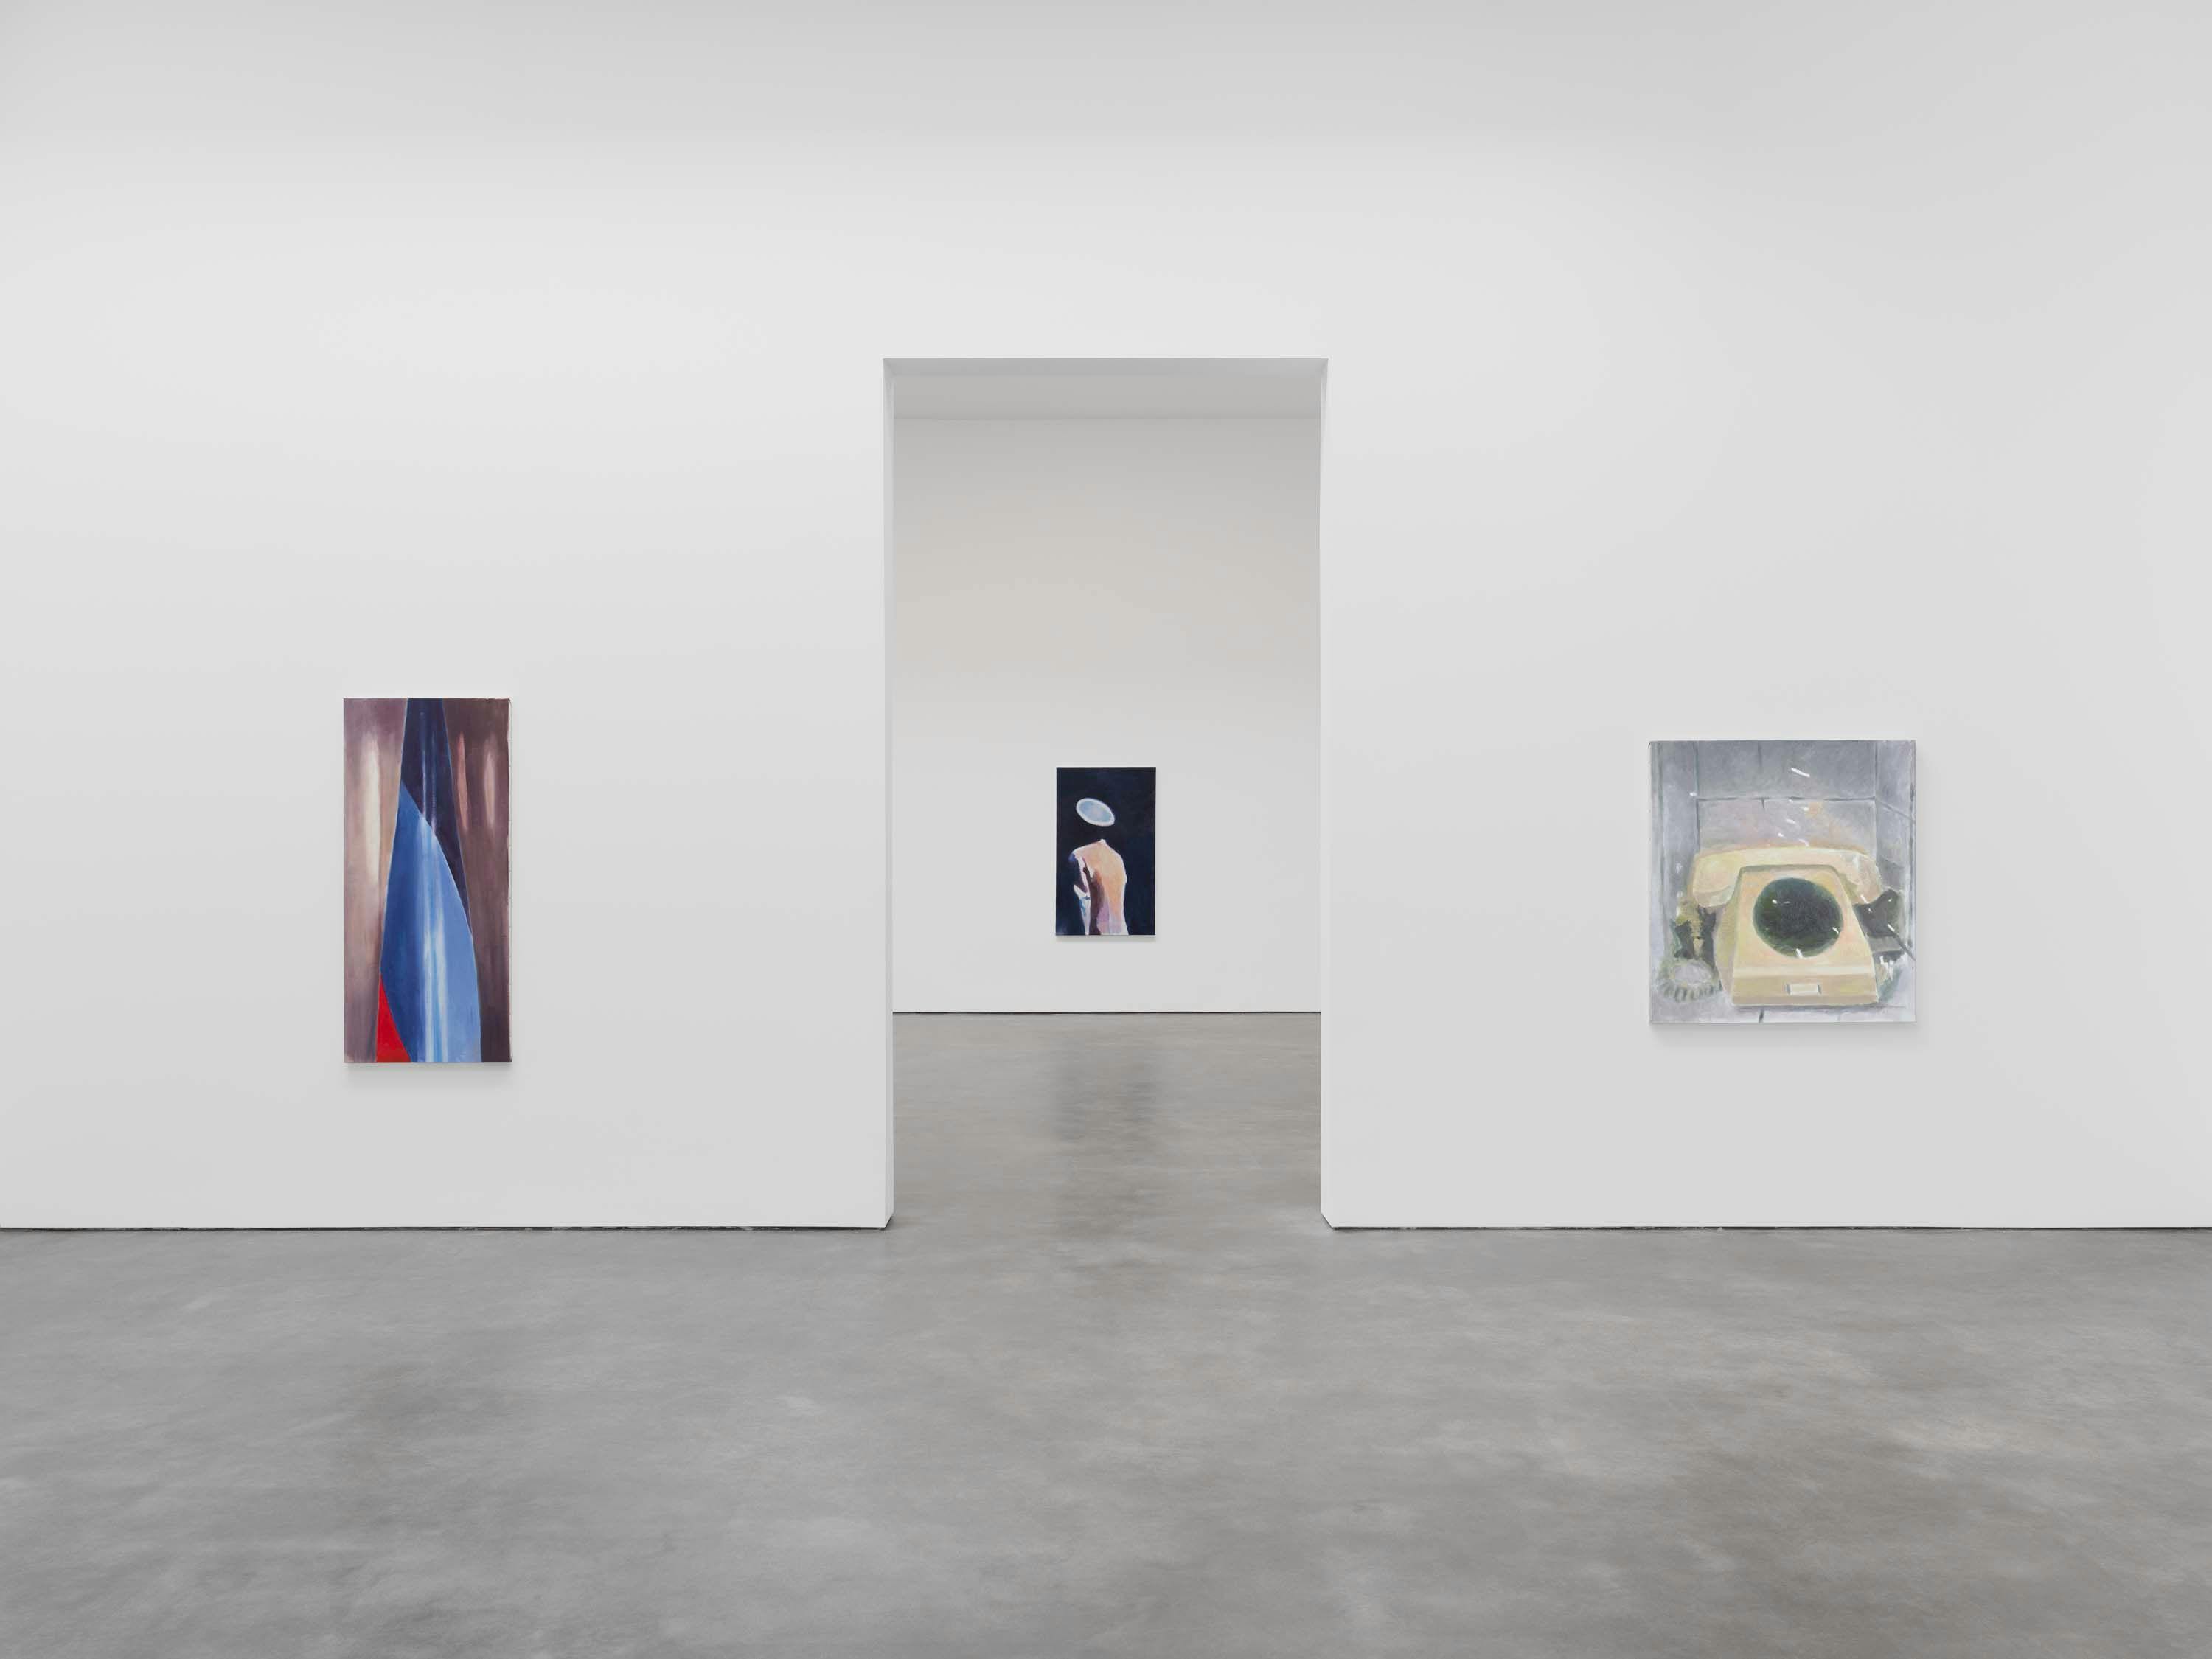 An installation view of the exhibition, Luc Tuymans: The Barn, at David Zwirner in New York, dated 2023.